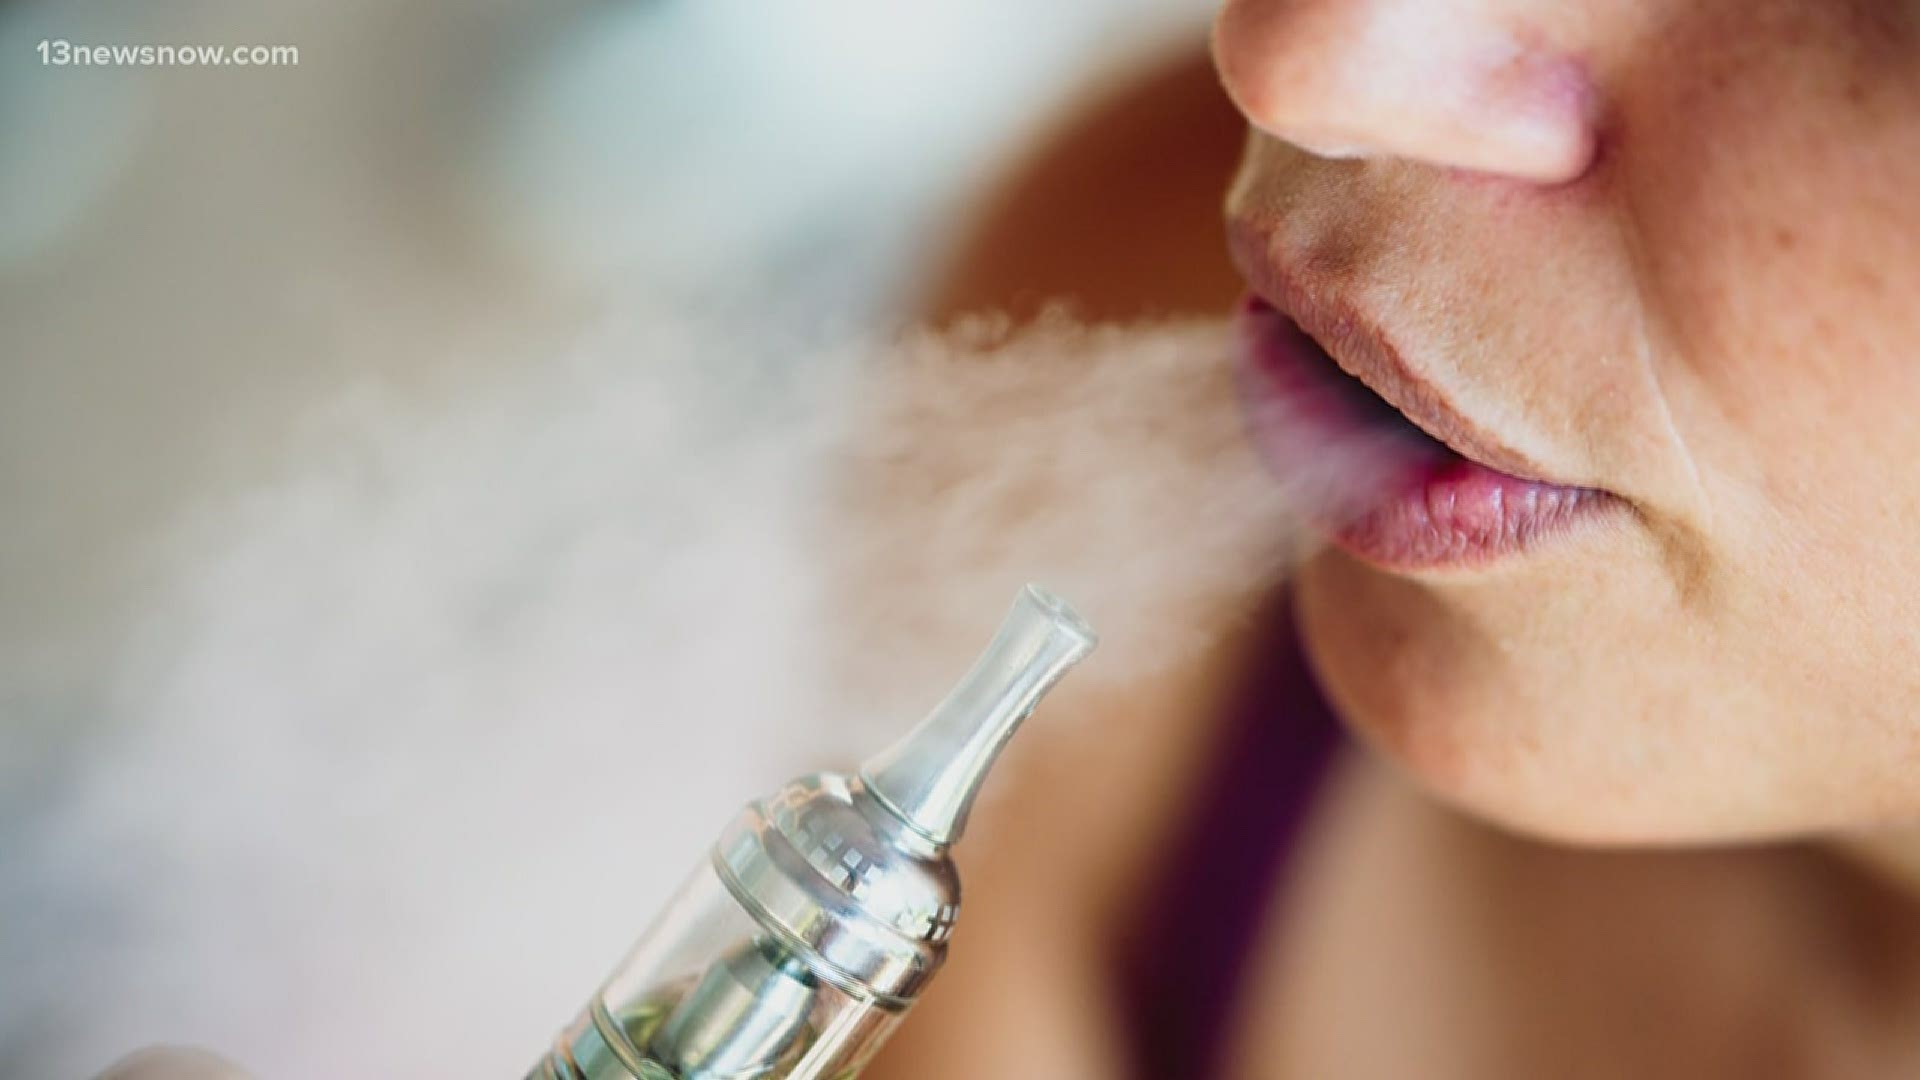 Could vaping put you at greater risk of severe illness during coronavirus?